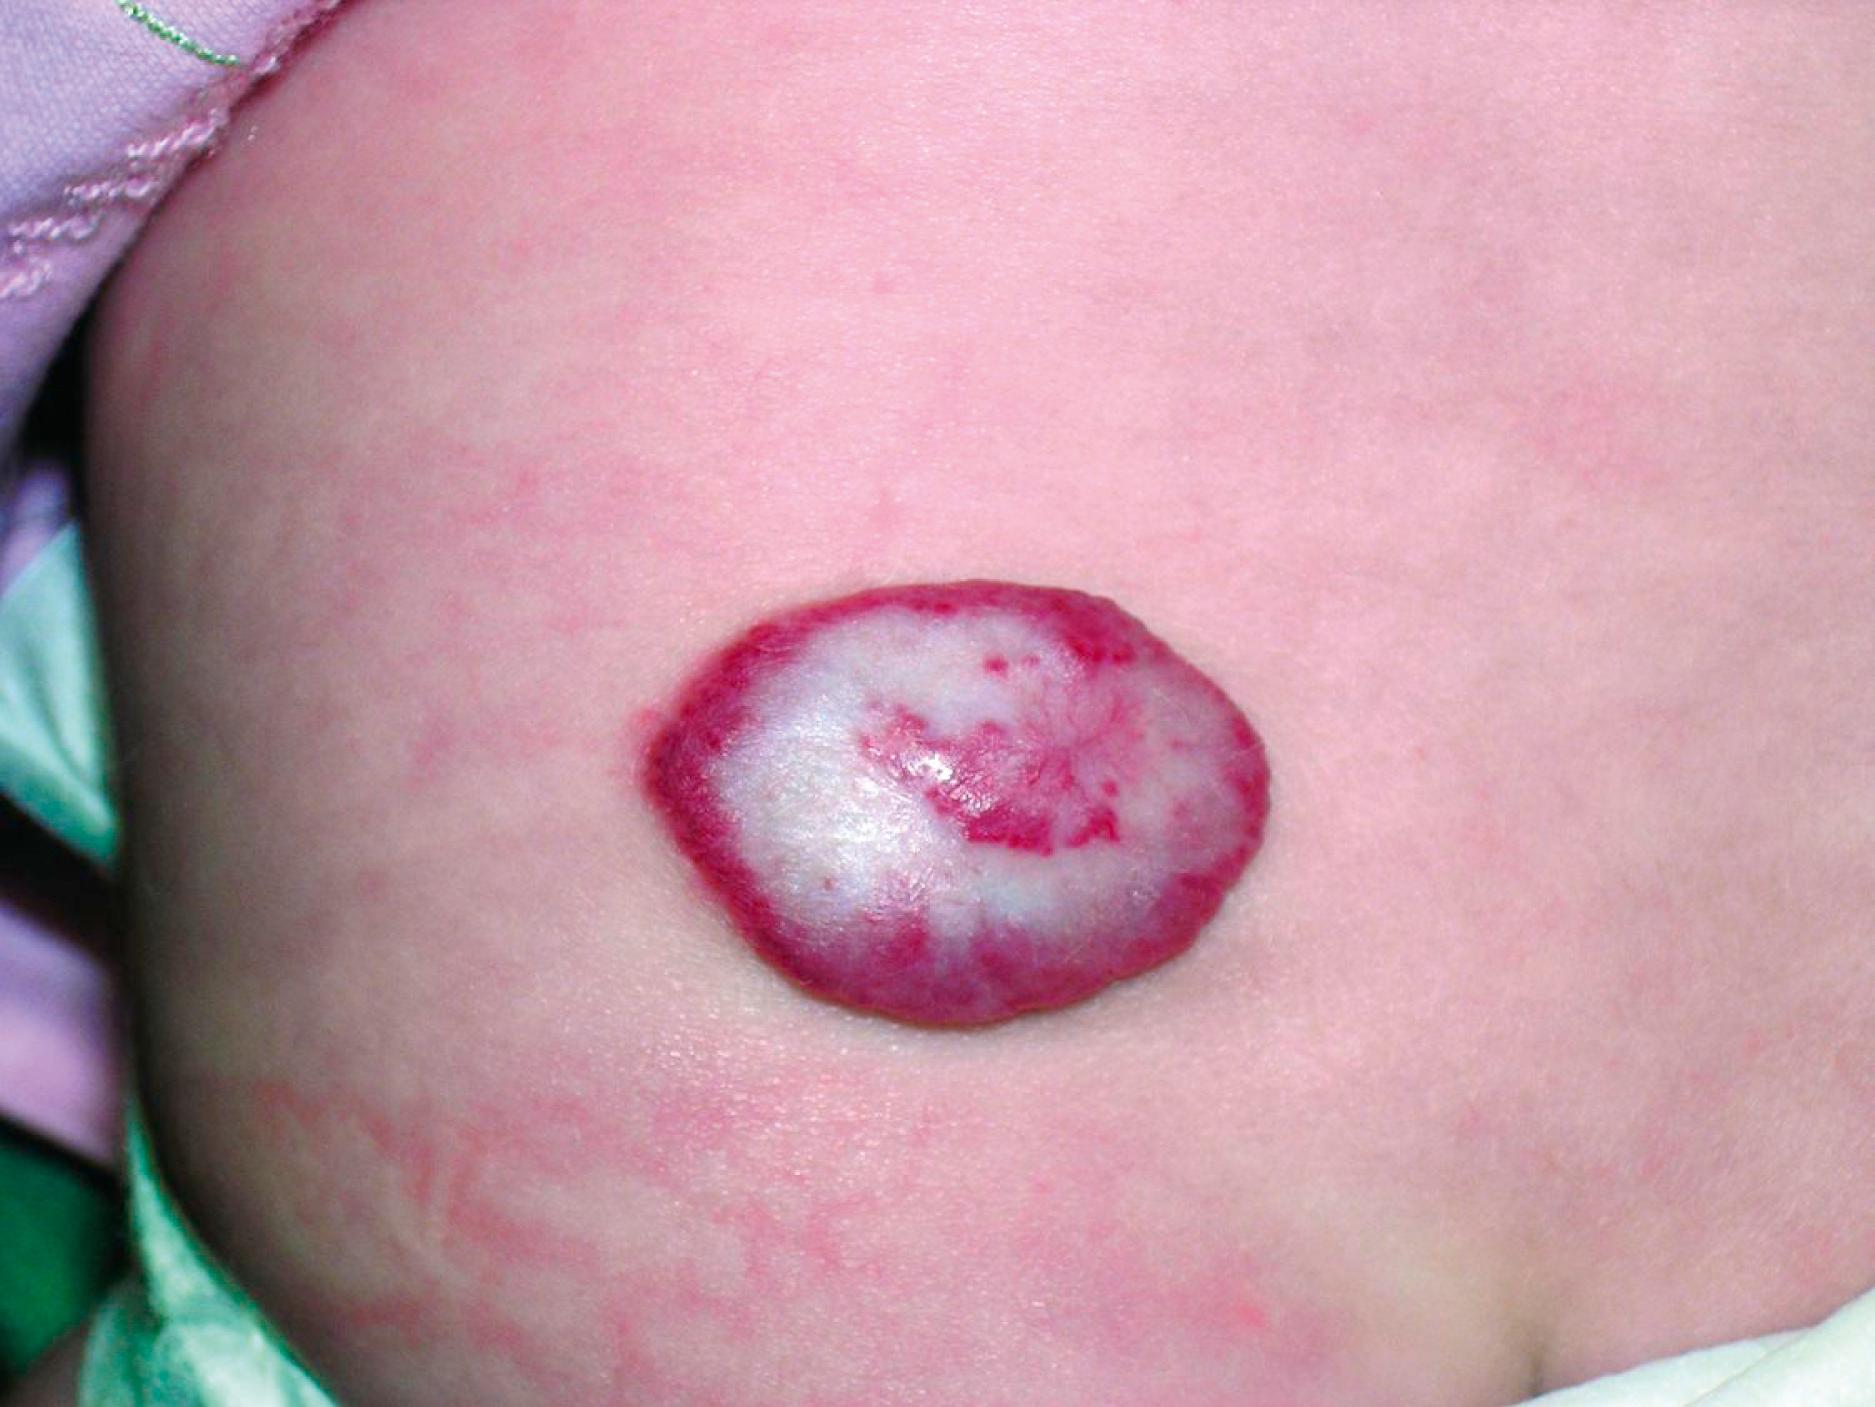 Fig. 10.9, Involuting hemangioma. The onset of involution is signaled by a “graying out” of the surface of the lesion. When this occurs during the rapid proliferation stage, it signals impending ulceration.